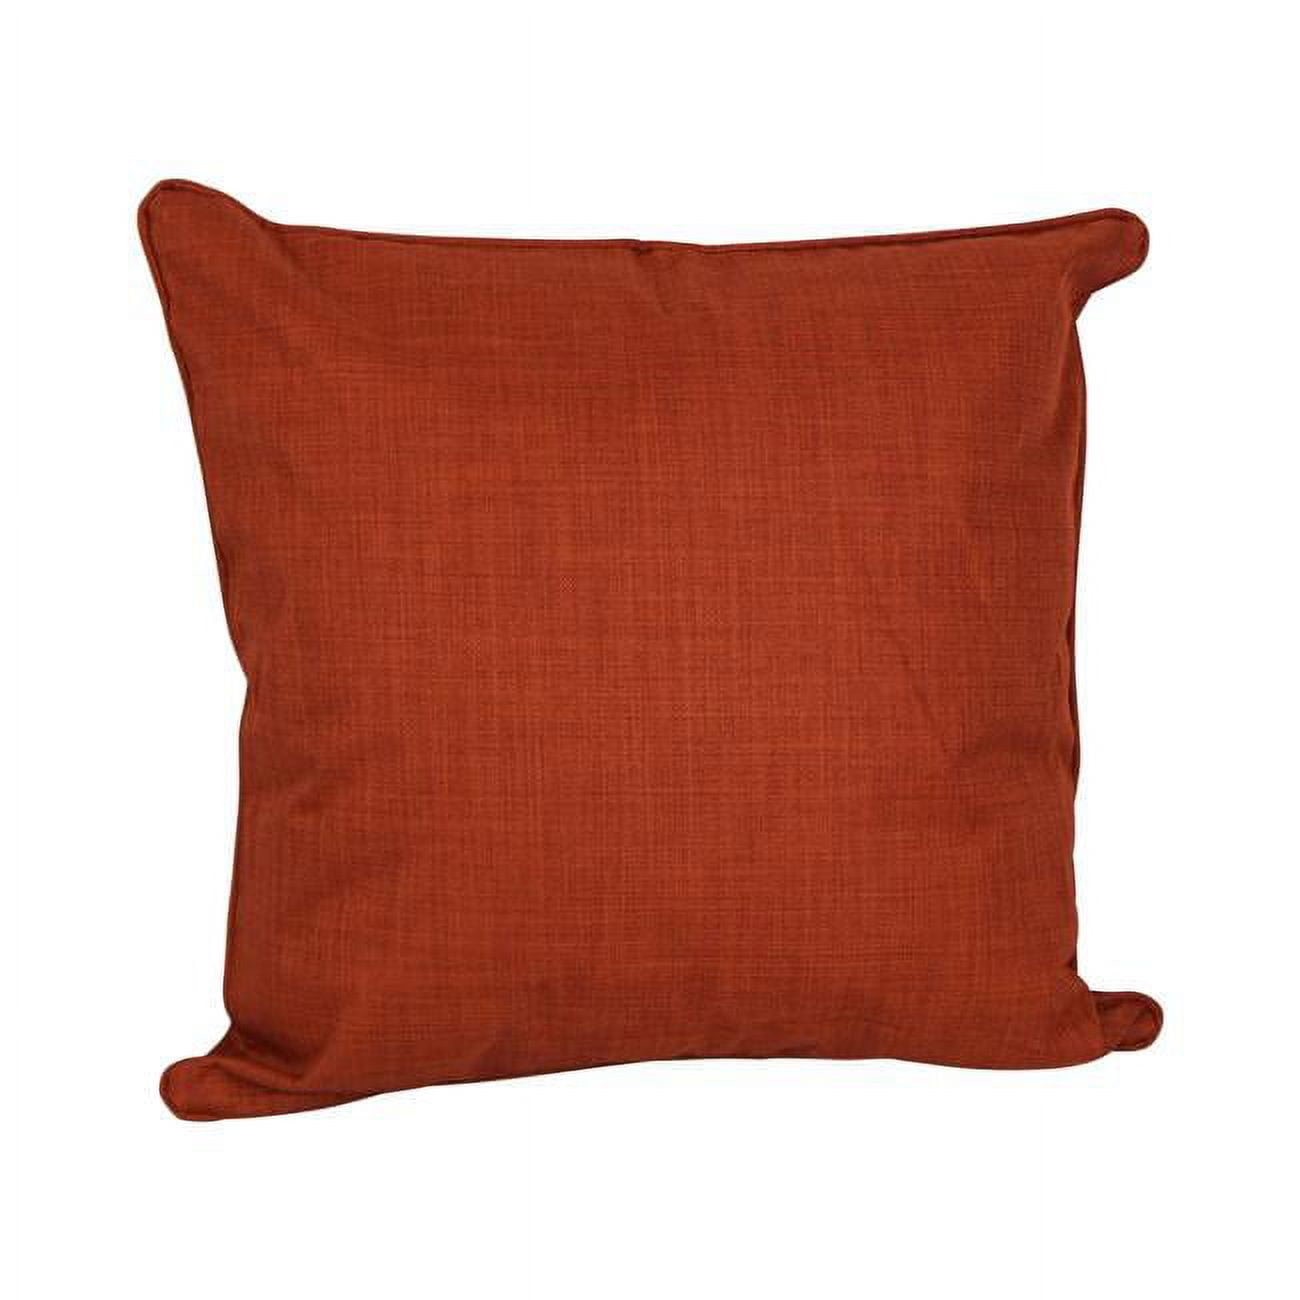 Picture of Blazing Needles 9813-CD-S1-REO-SOL-06 25 in. Double-Corded Spun Polyester Square Floor Pillow with Insert, Cinnamon